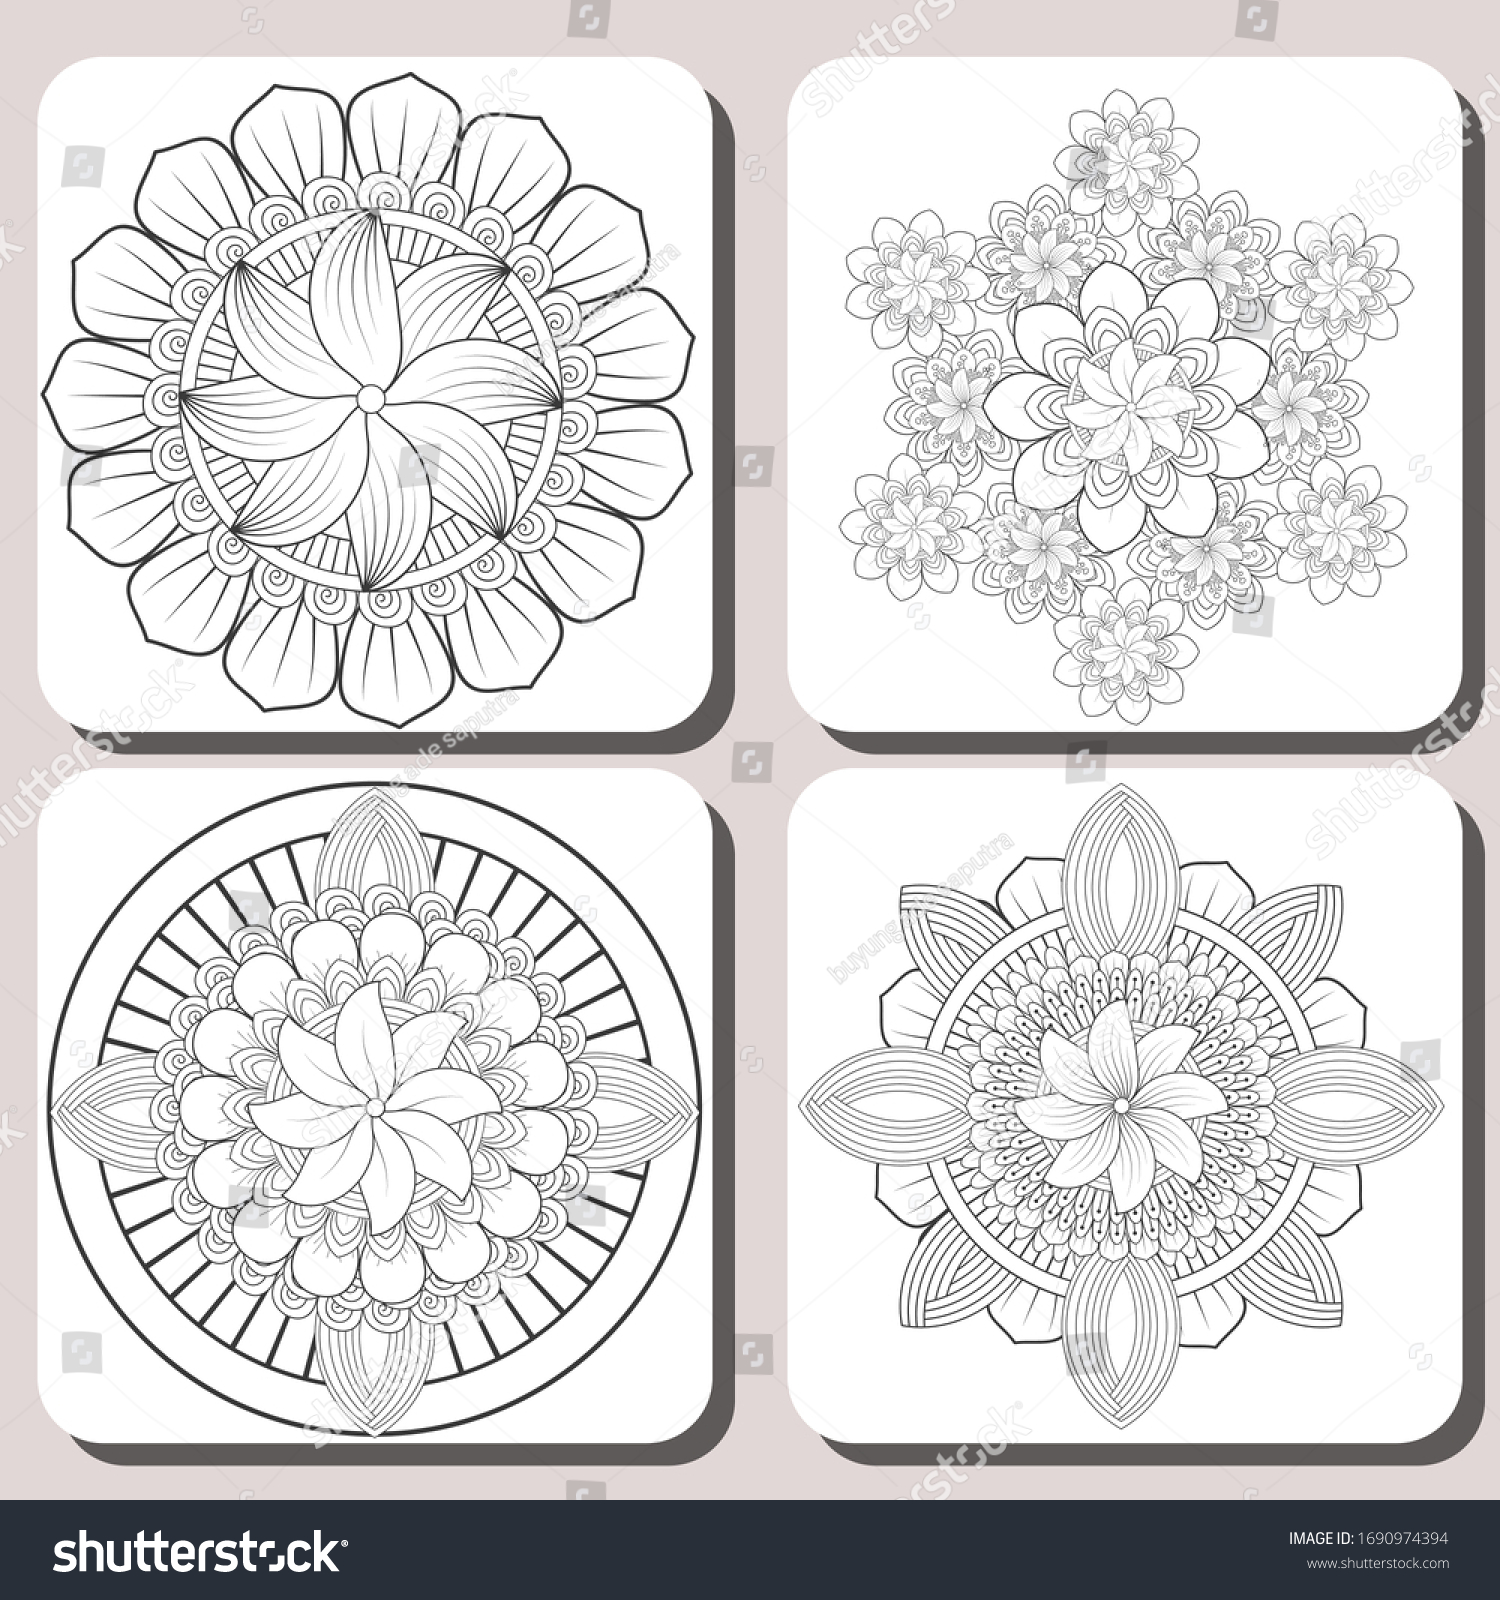 Download Coloring Book Sets Coloring Pages Adult Stock Vector Royalty Free 1690974394